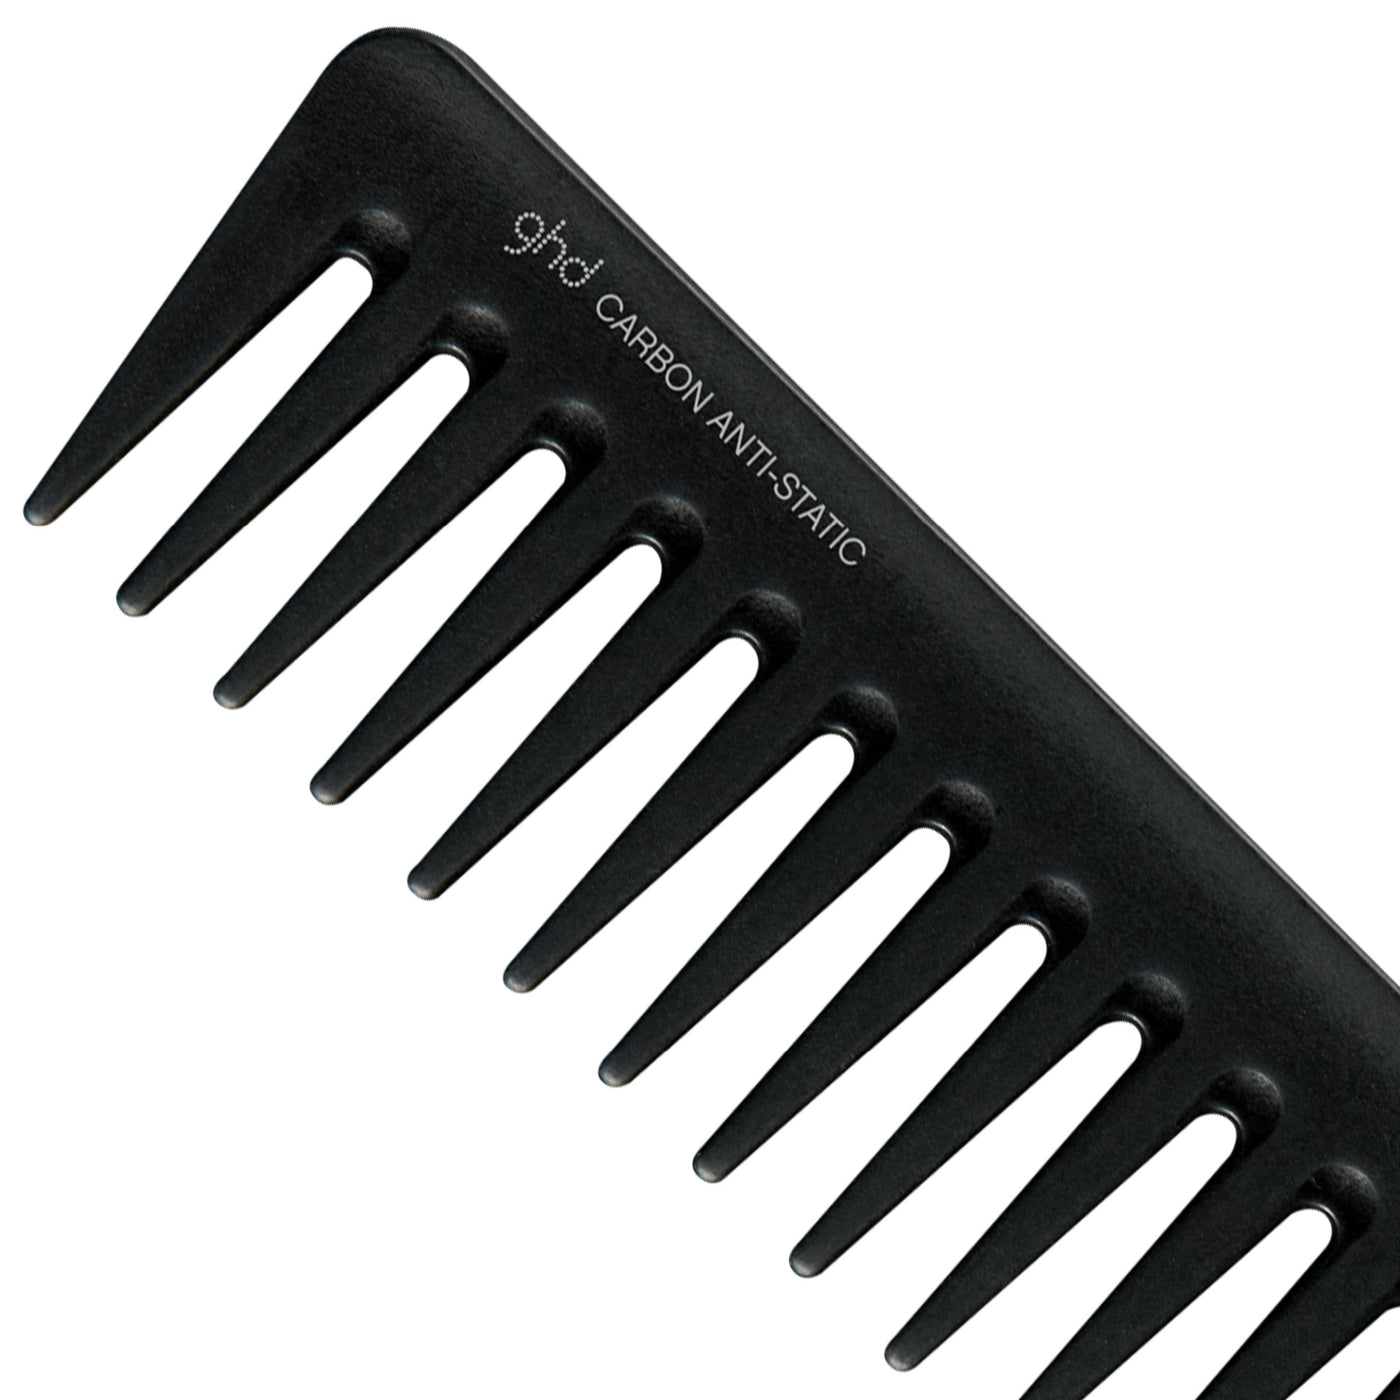 ghd Detangling Comb - with a wide toothed design